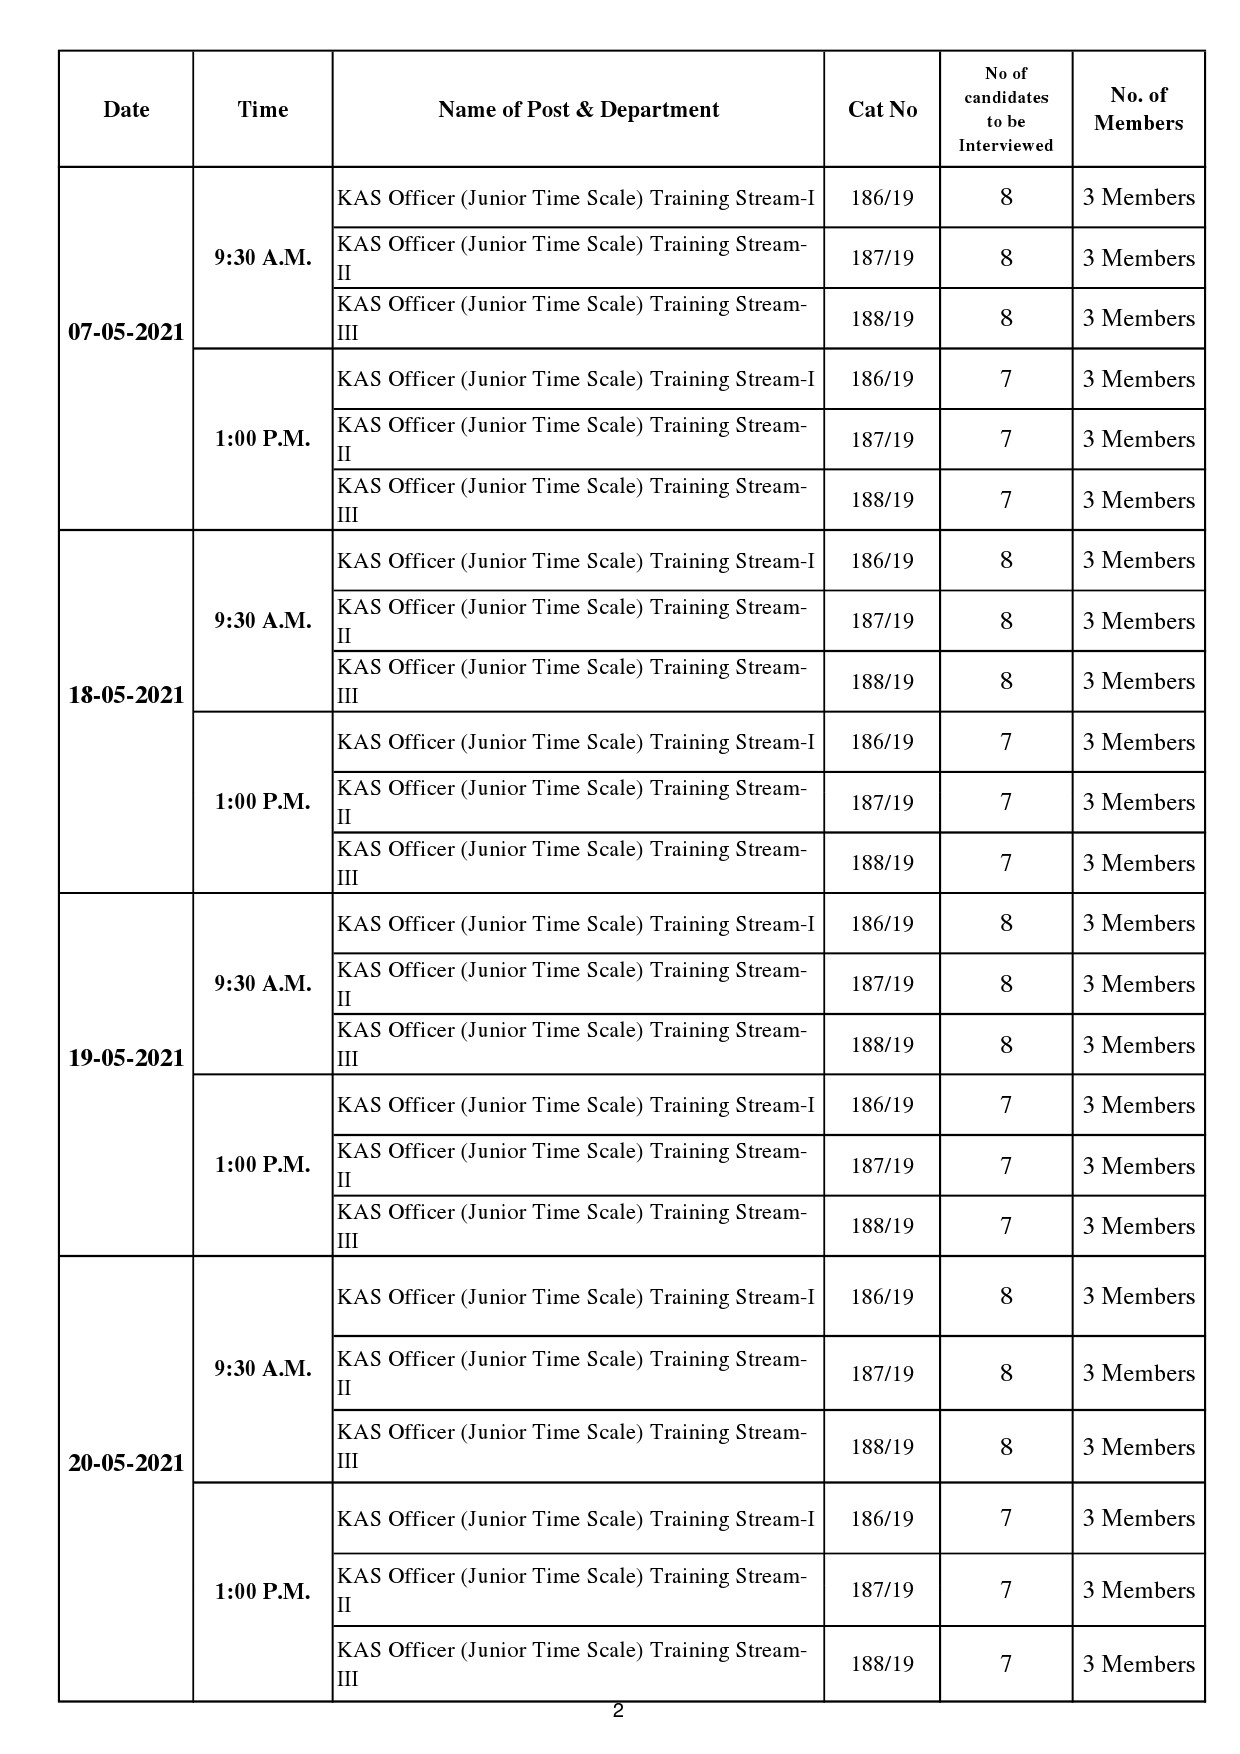 INTERVIEW PROGRAMME FOR THE MONTH OF MAY JUNE 2021 - Notification Image 2